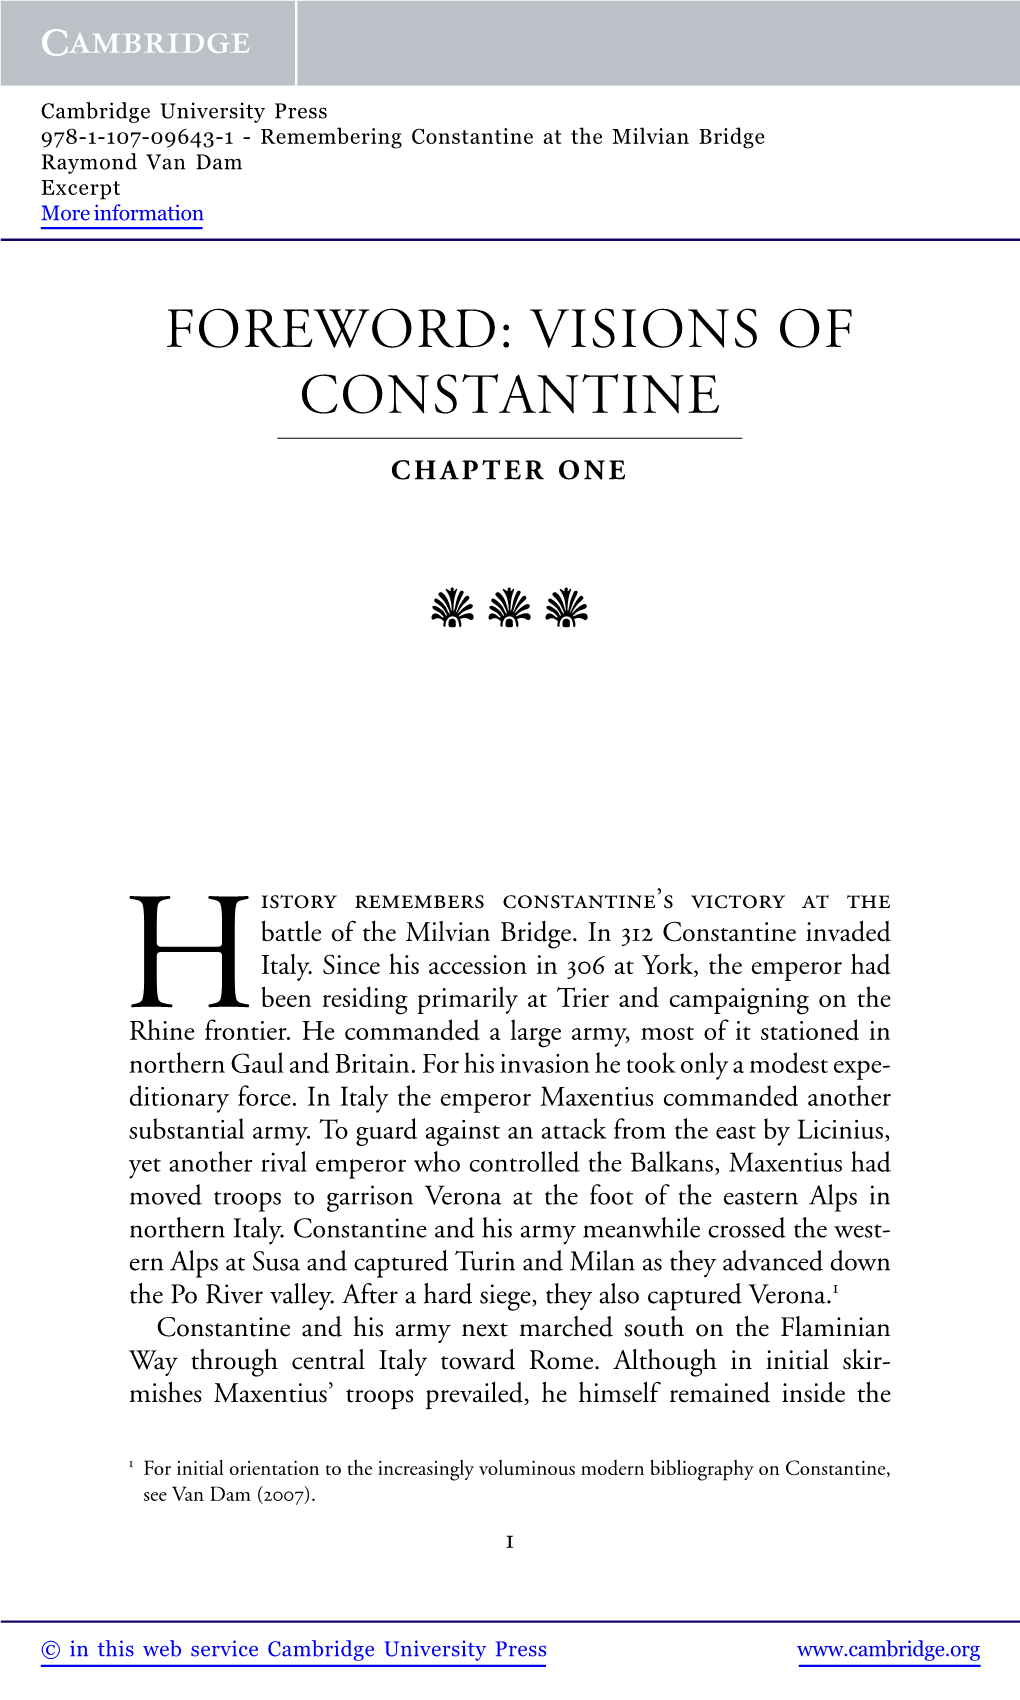 Foreword: Visions of Constantine